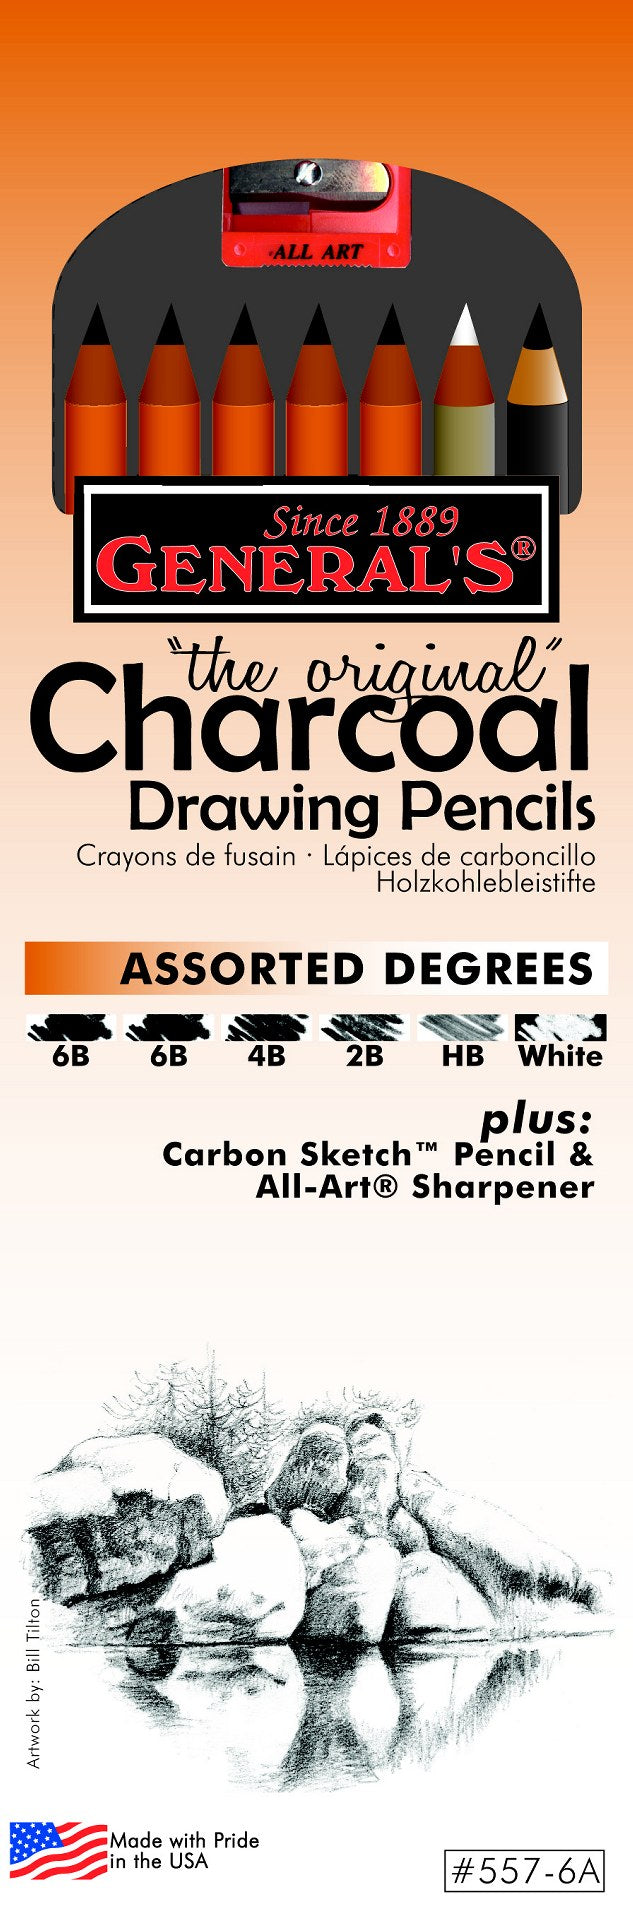 General's Charcoal Drawing Pencils Assorted Degrees 7 Piece + Sharpener